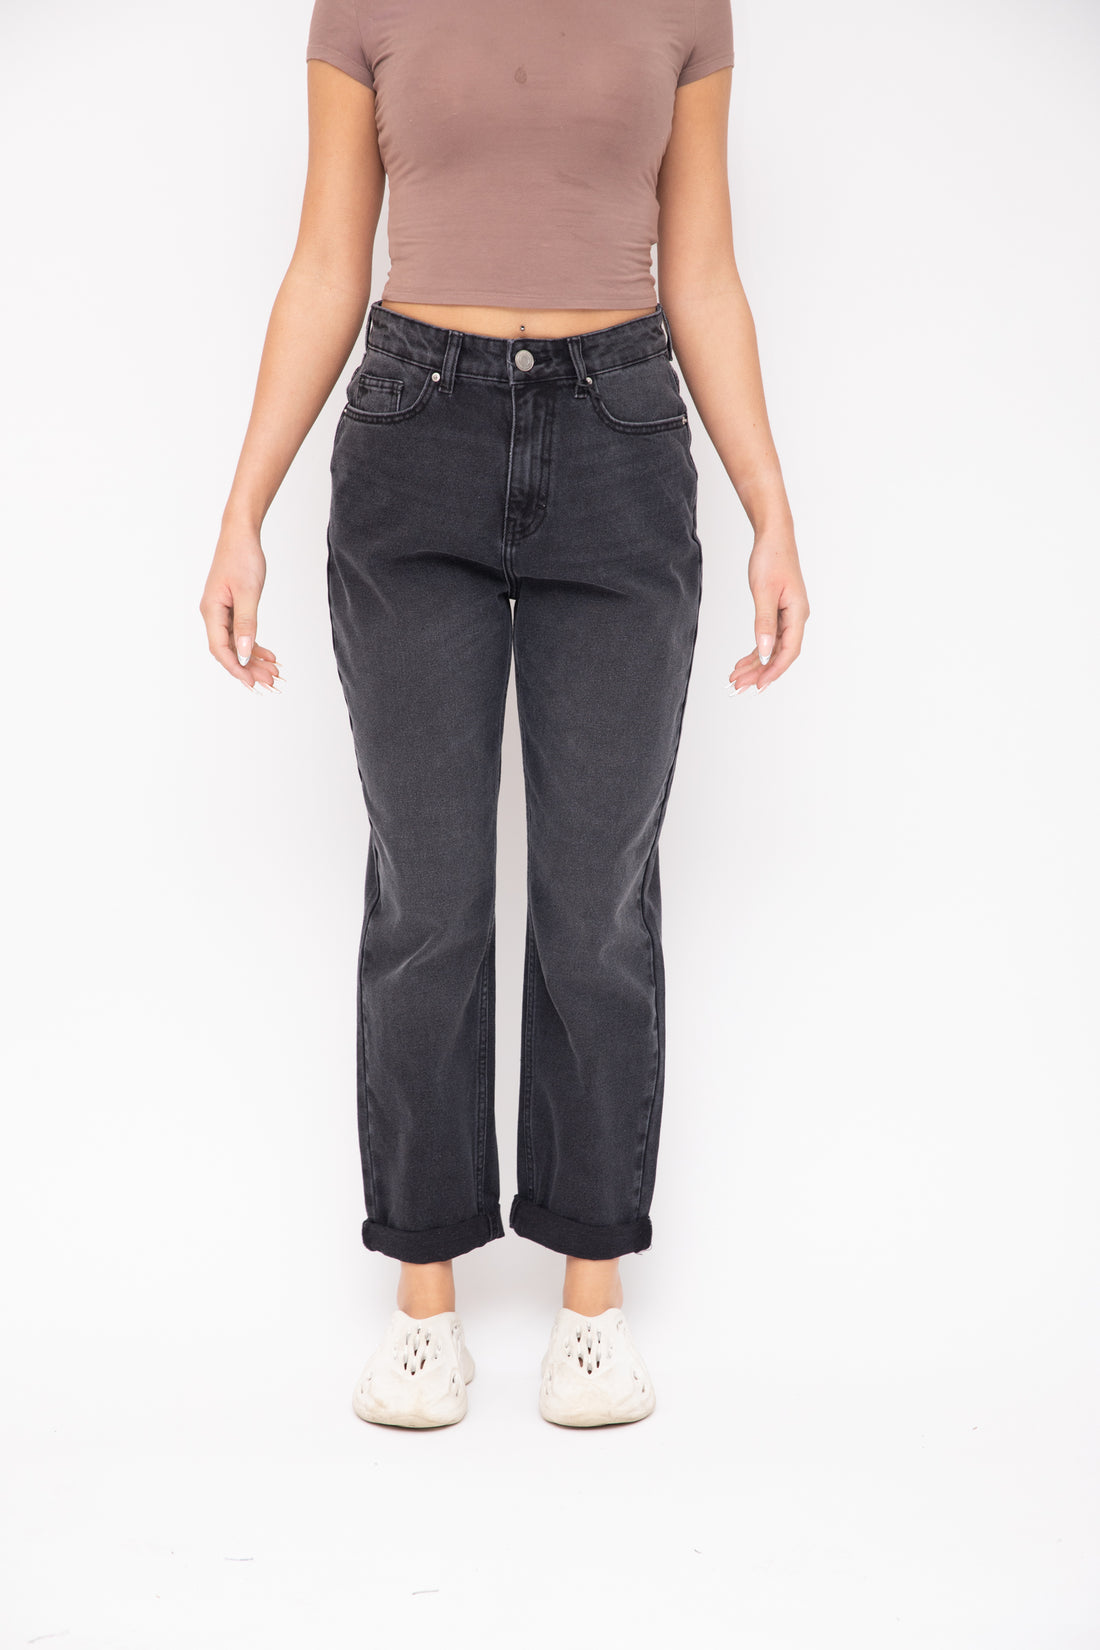 Just Organic Poppy Jeans - Washed Black